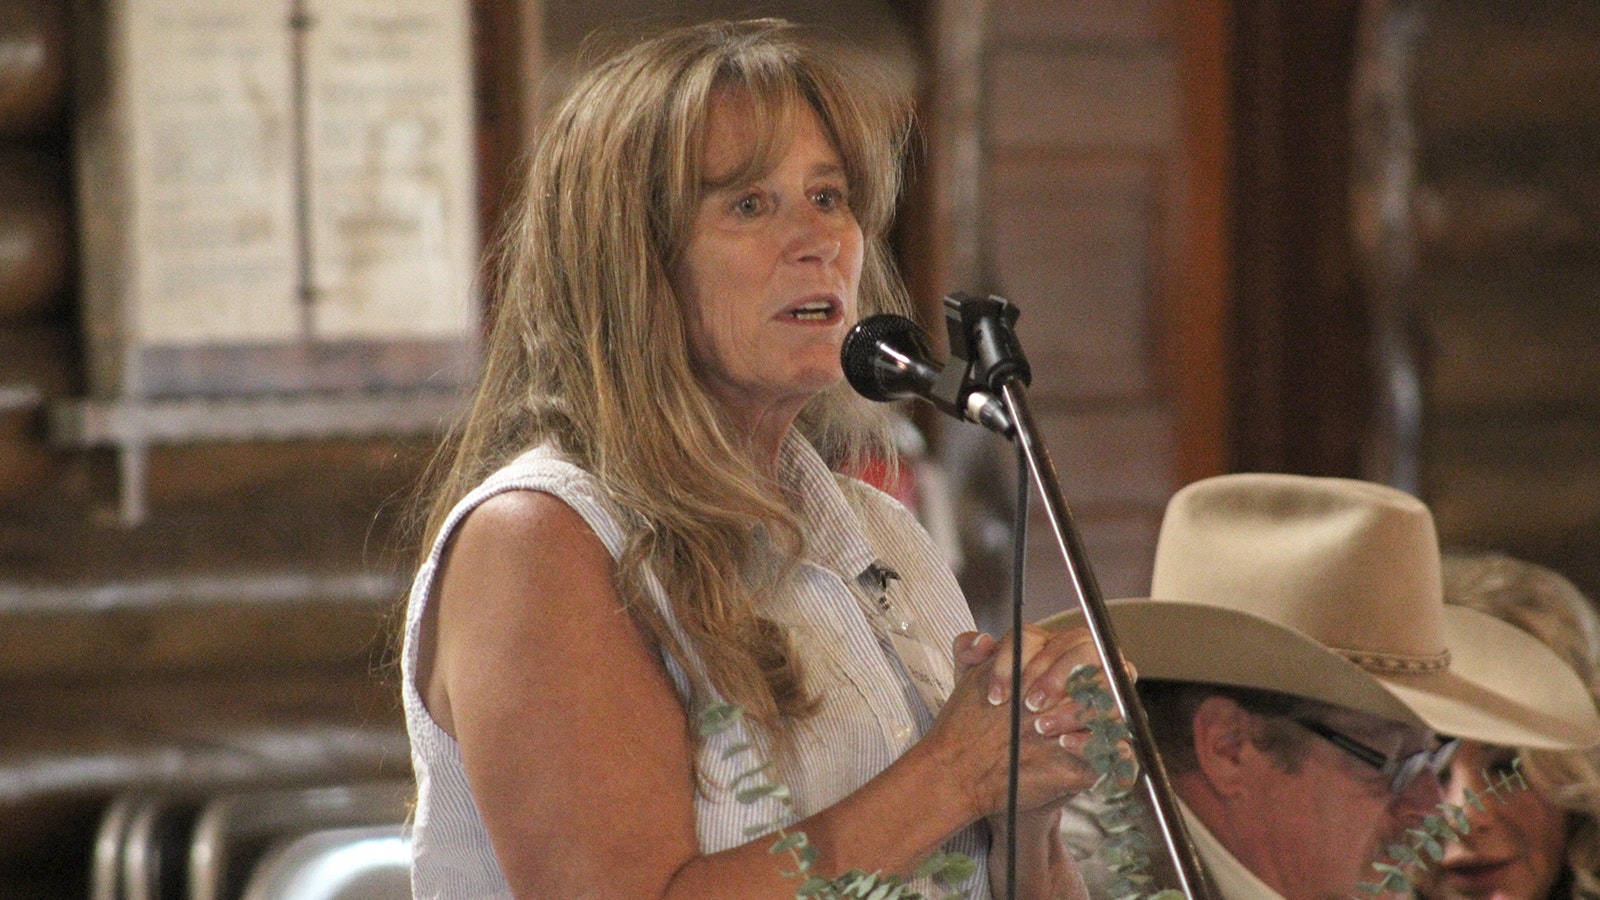 Albany County Republican Party Chairwoman Roxie Hensley addresses the state Republican Party Central Committee in Laramie on Saturday.